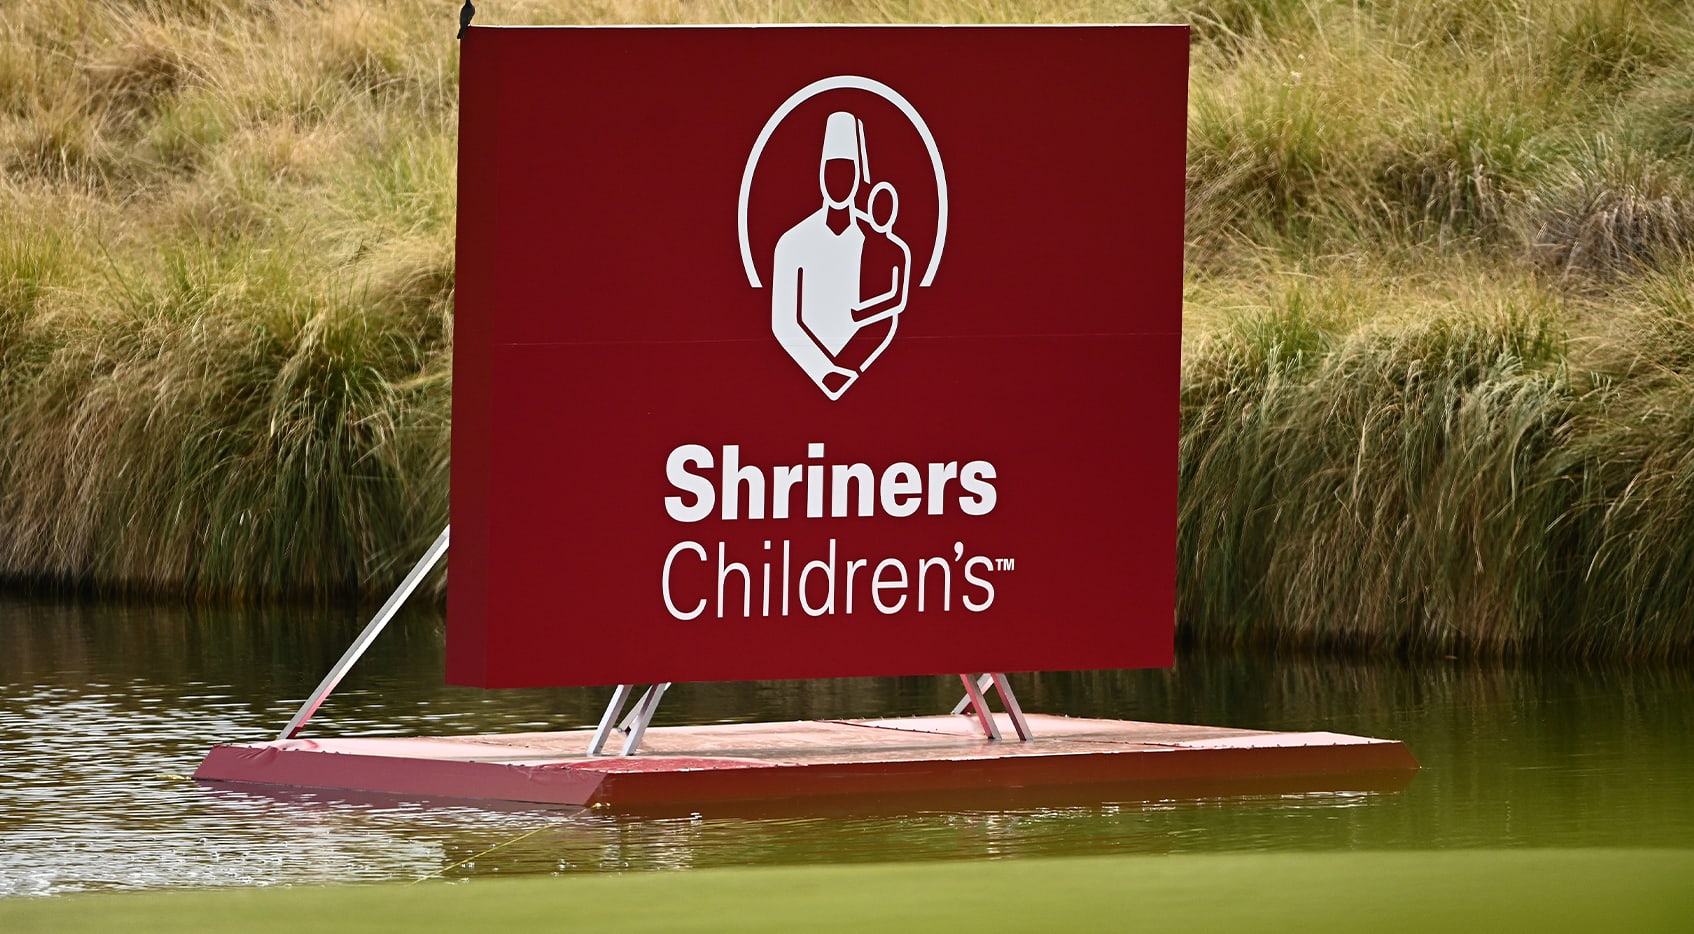 How to watch Shriners Children's Open, Round 3 Featured Groups, live